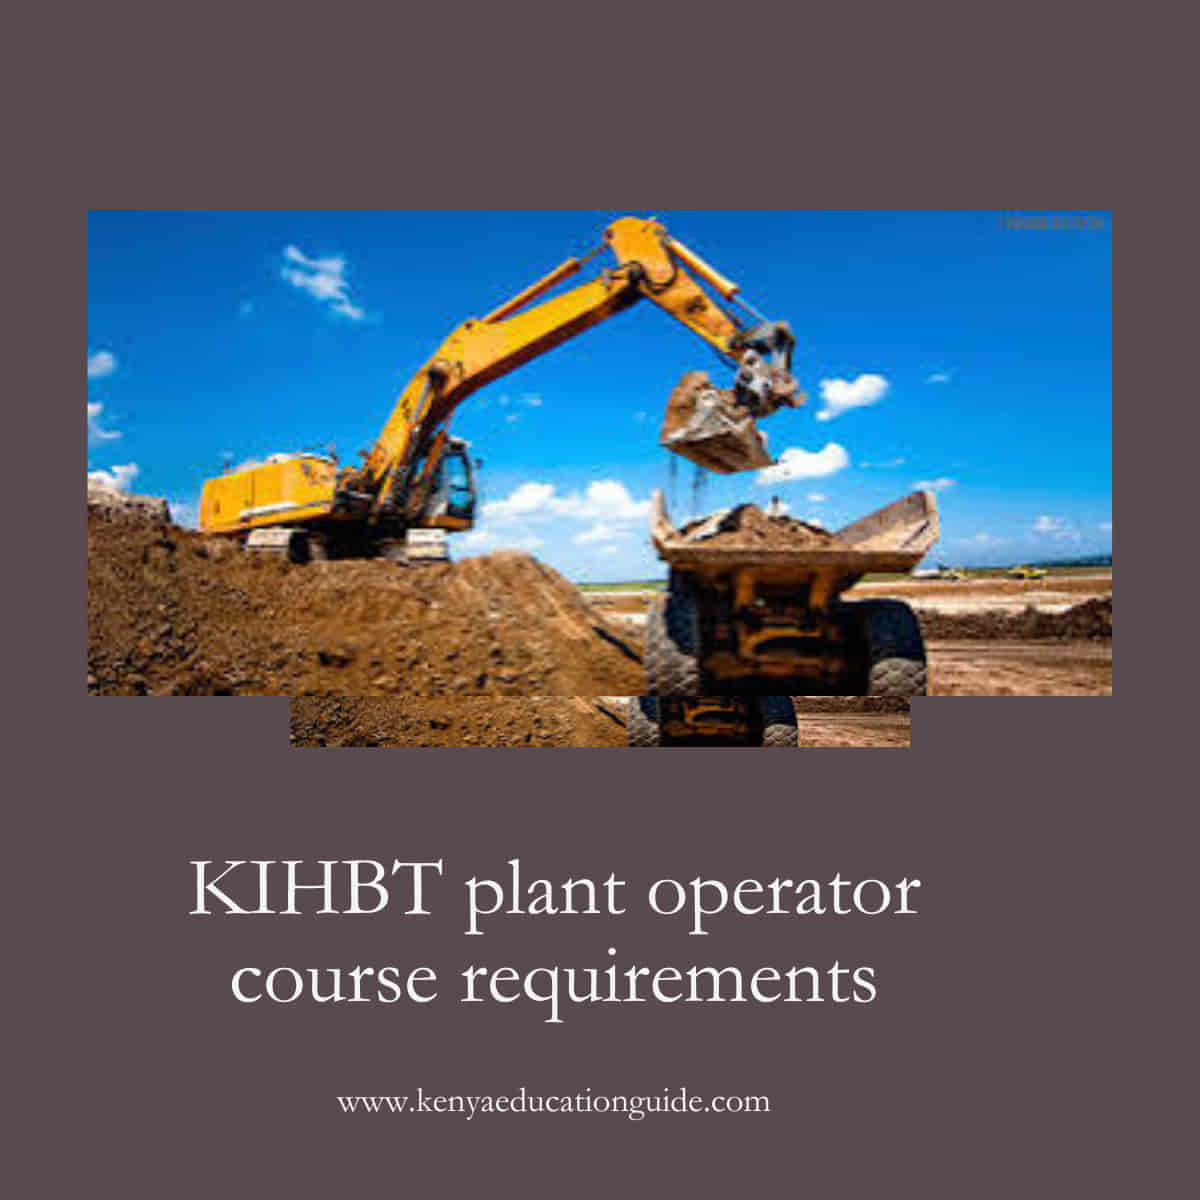 KIHBT plant operator course requirements